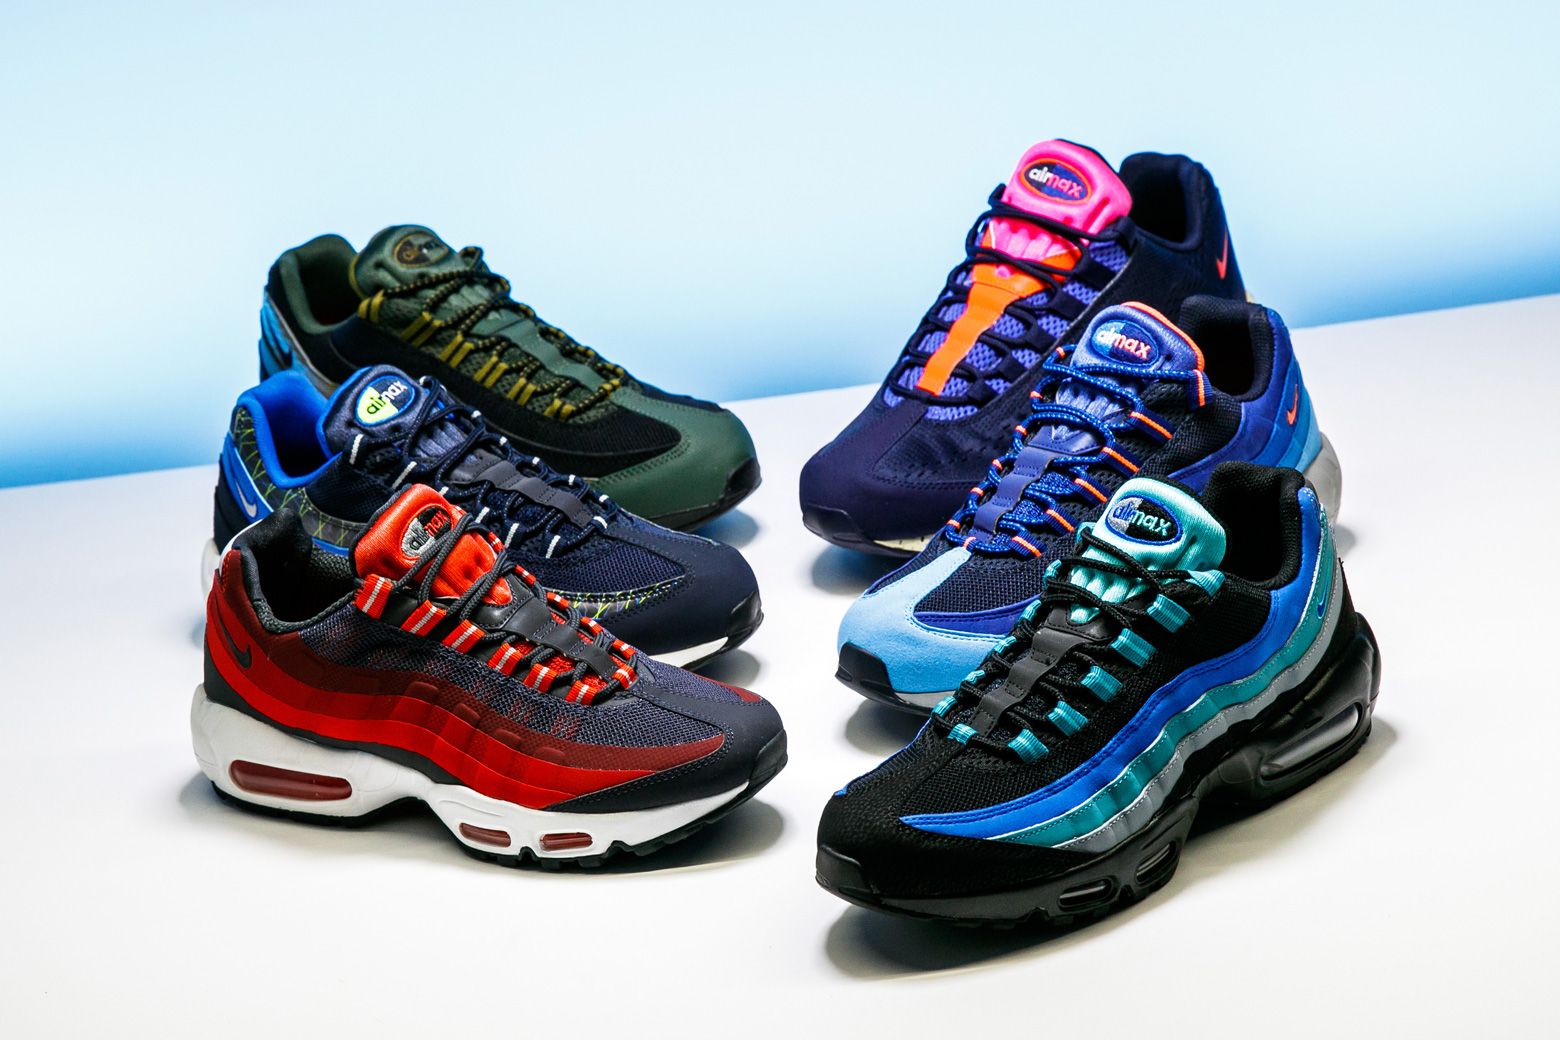 Stadium Goods on "Twenty-plus years and hundreds of variations later, which Air Max 95 colorways are the best? https://t.co/MgV2h3aWGO https://t.co/hc9HE48qWM" / Twitter